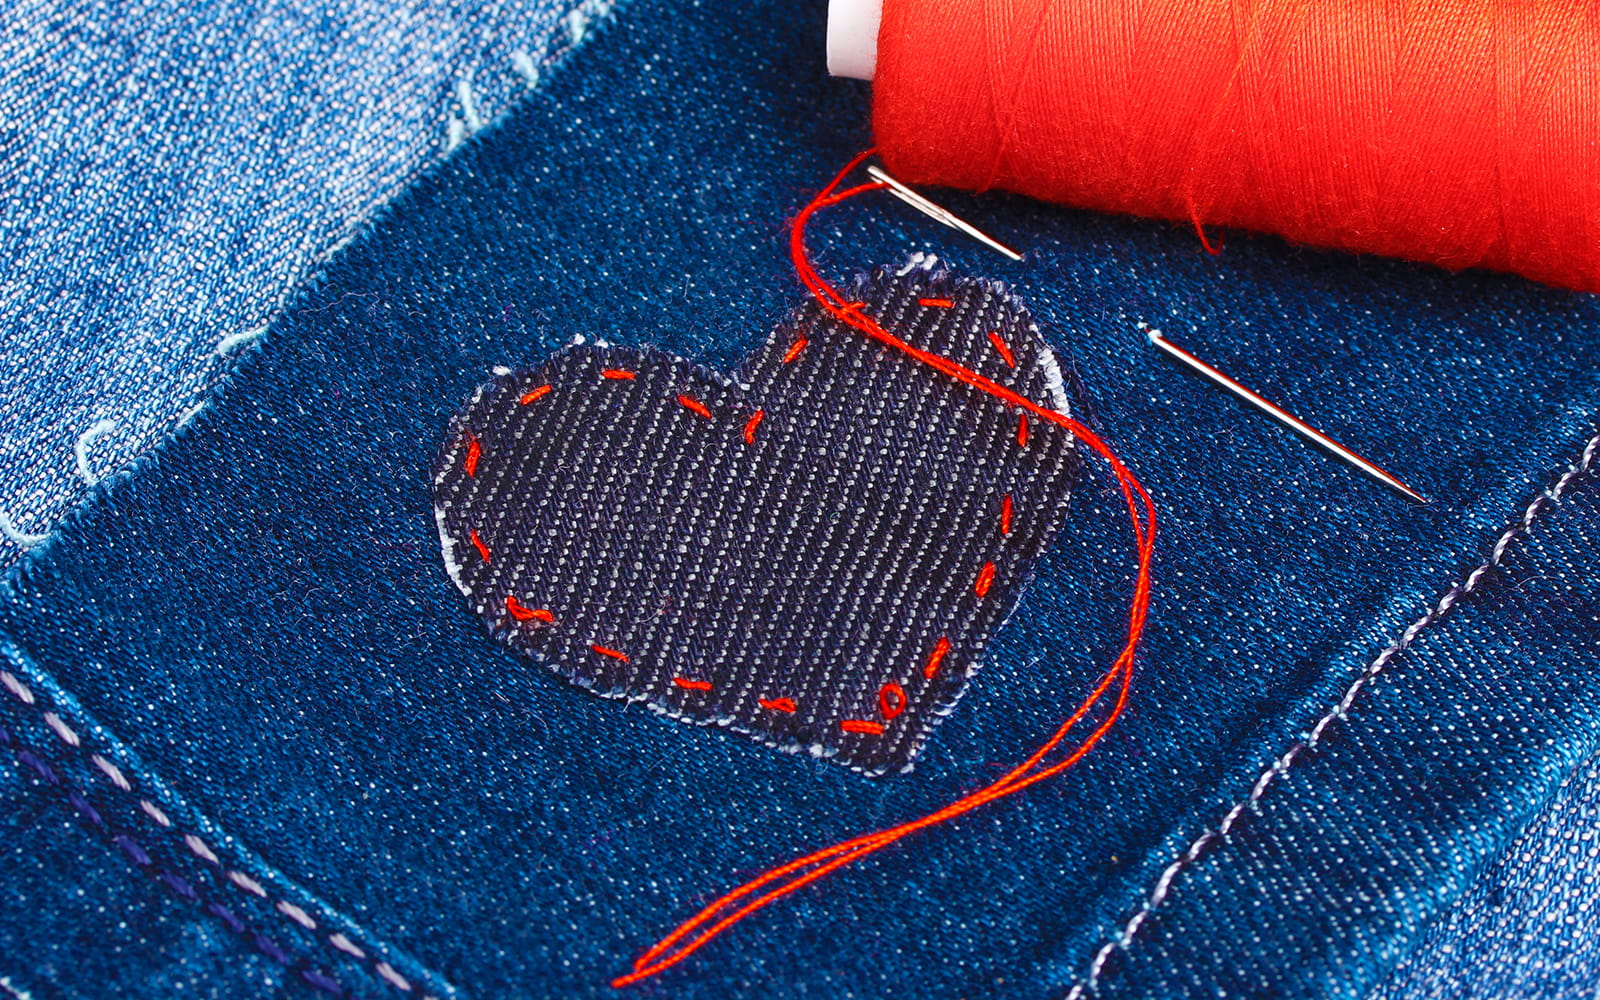 Heart shaped denim patch with red stitching round edge